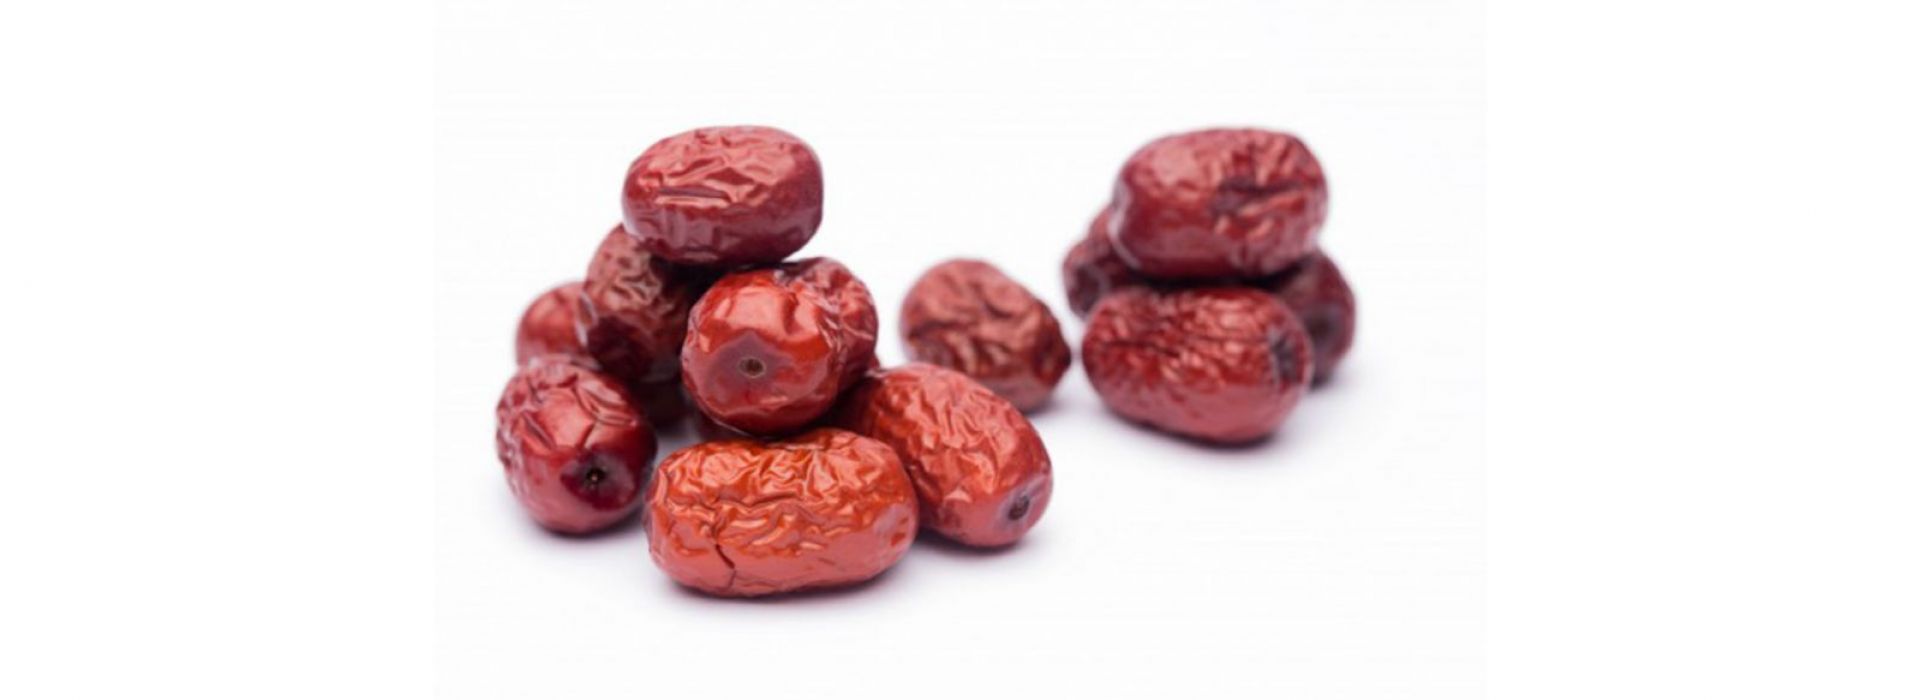 Red and Yellow Dates